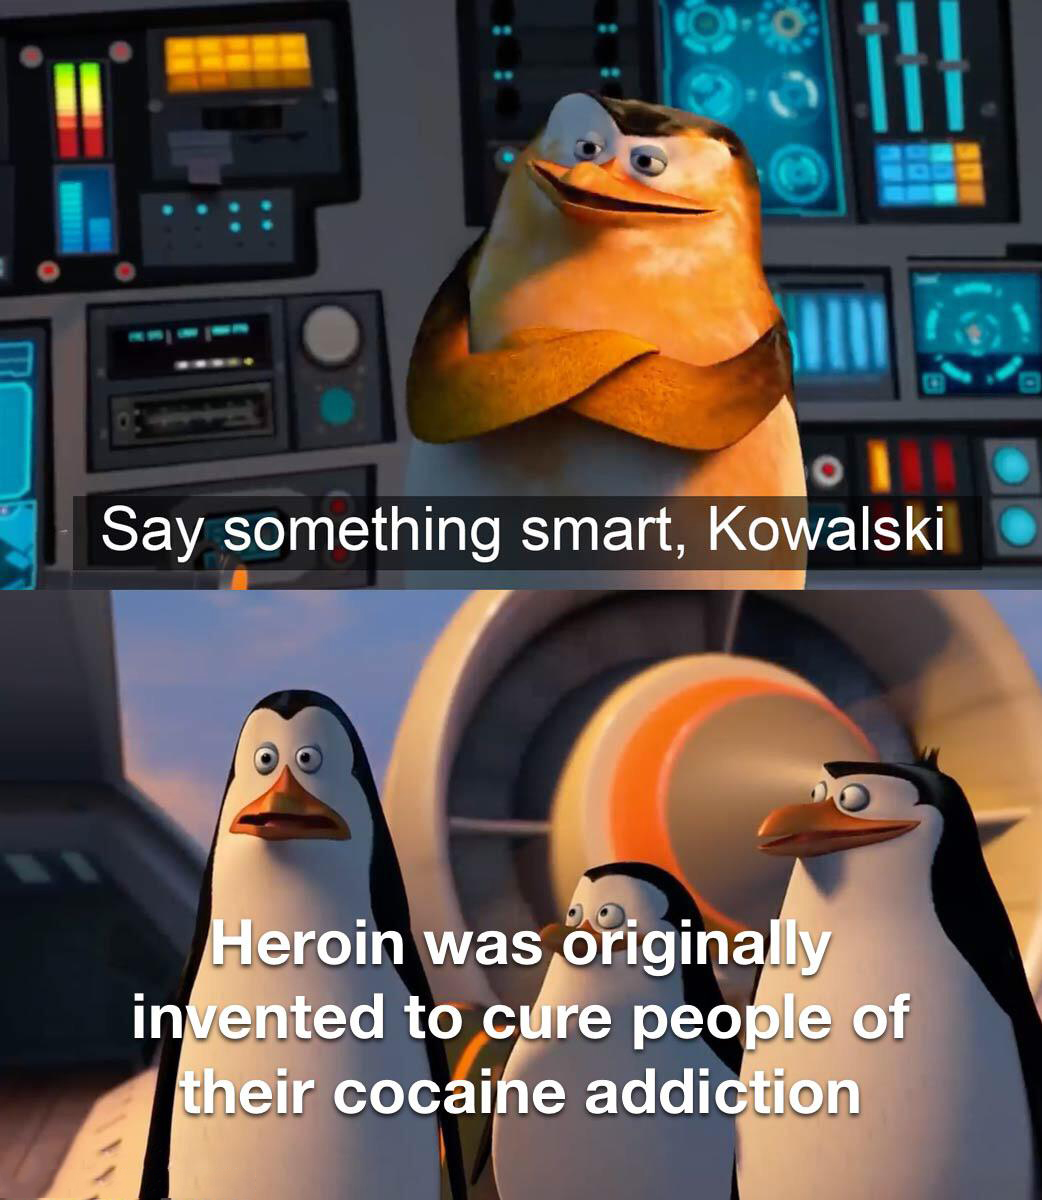 dank memes - funny memes - say something smart kowalski meme - Say something smart, Kowalski Heroin was originally invented to cure people of their cocaine addiction